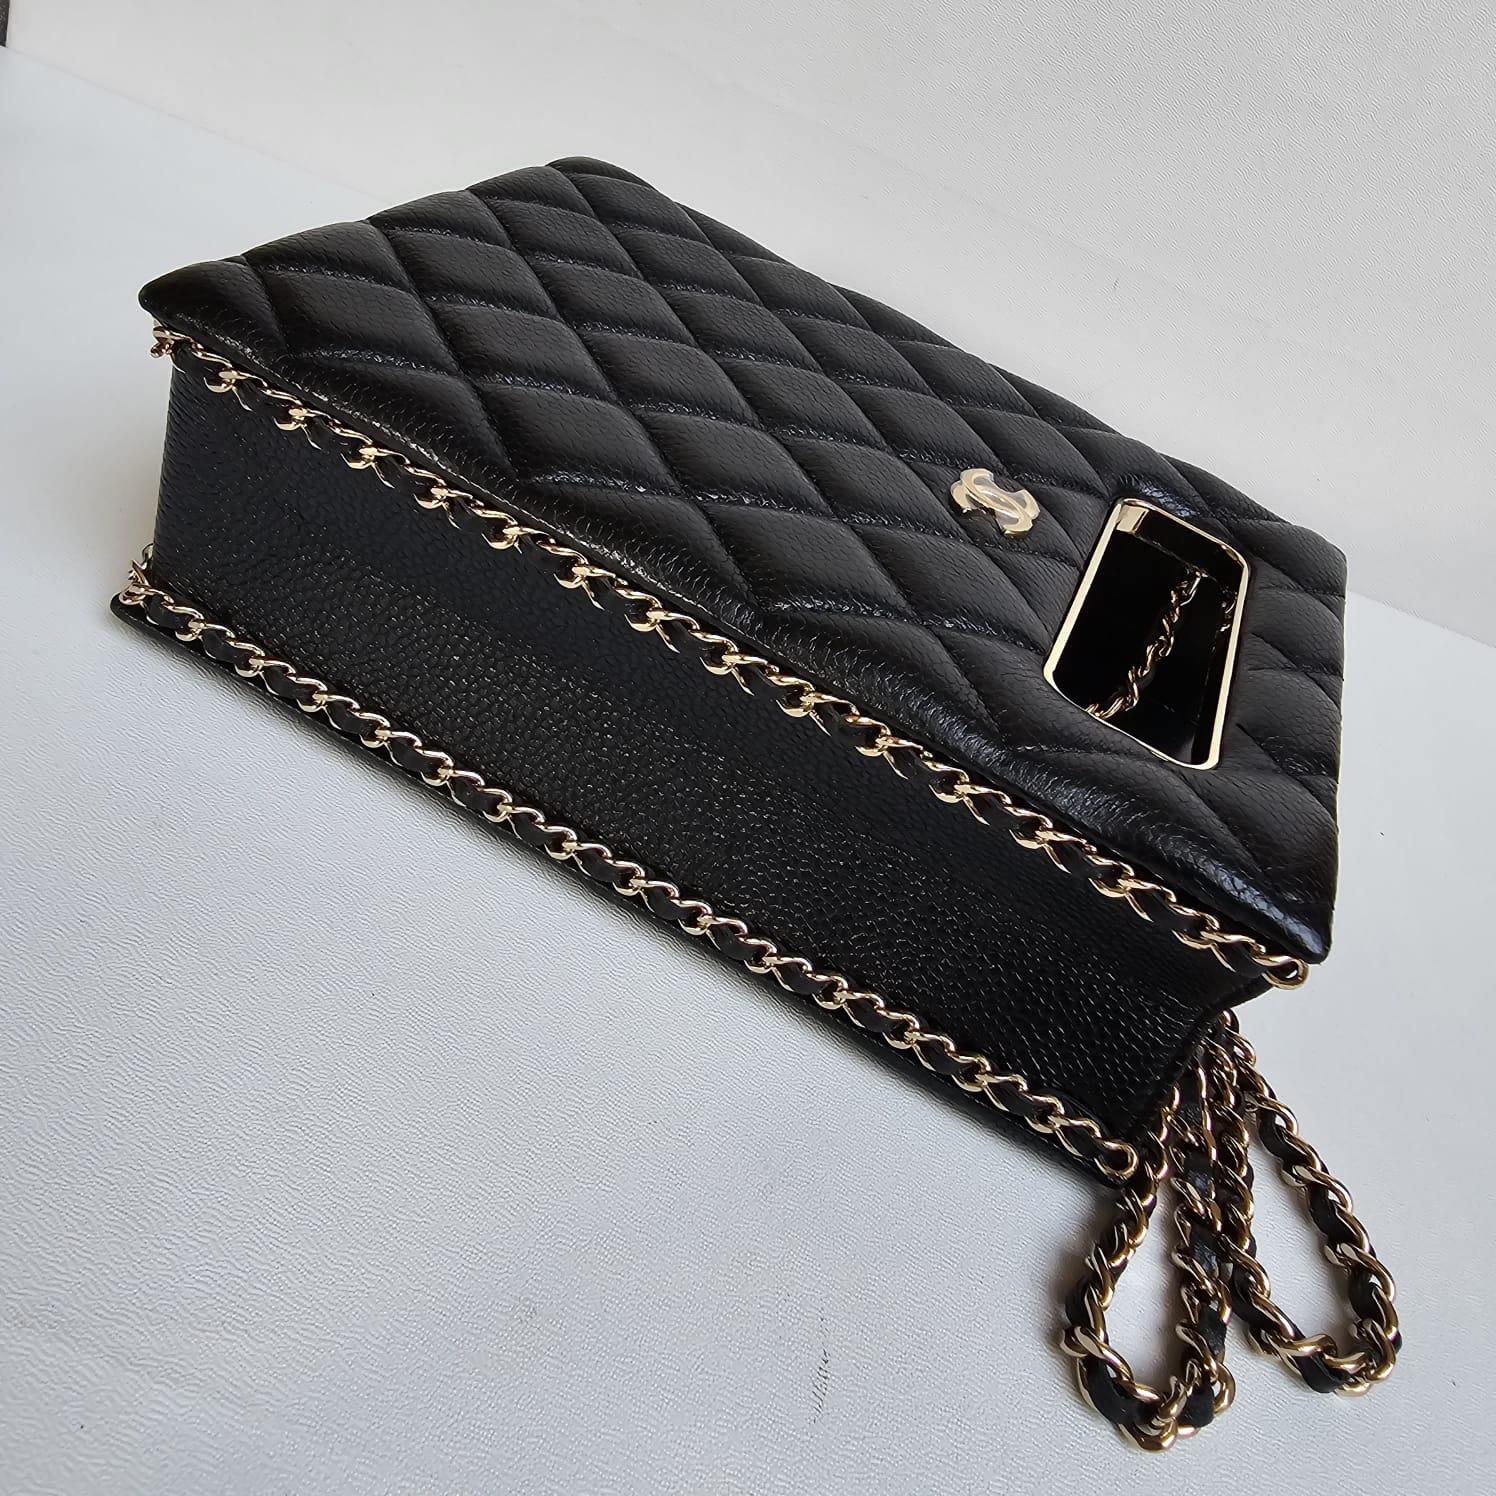 Chanel Black Caviar Quilted Evening Box Bag For Sale 12